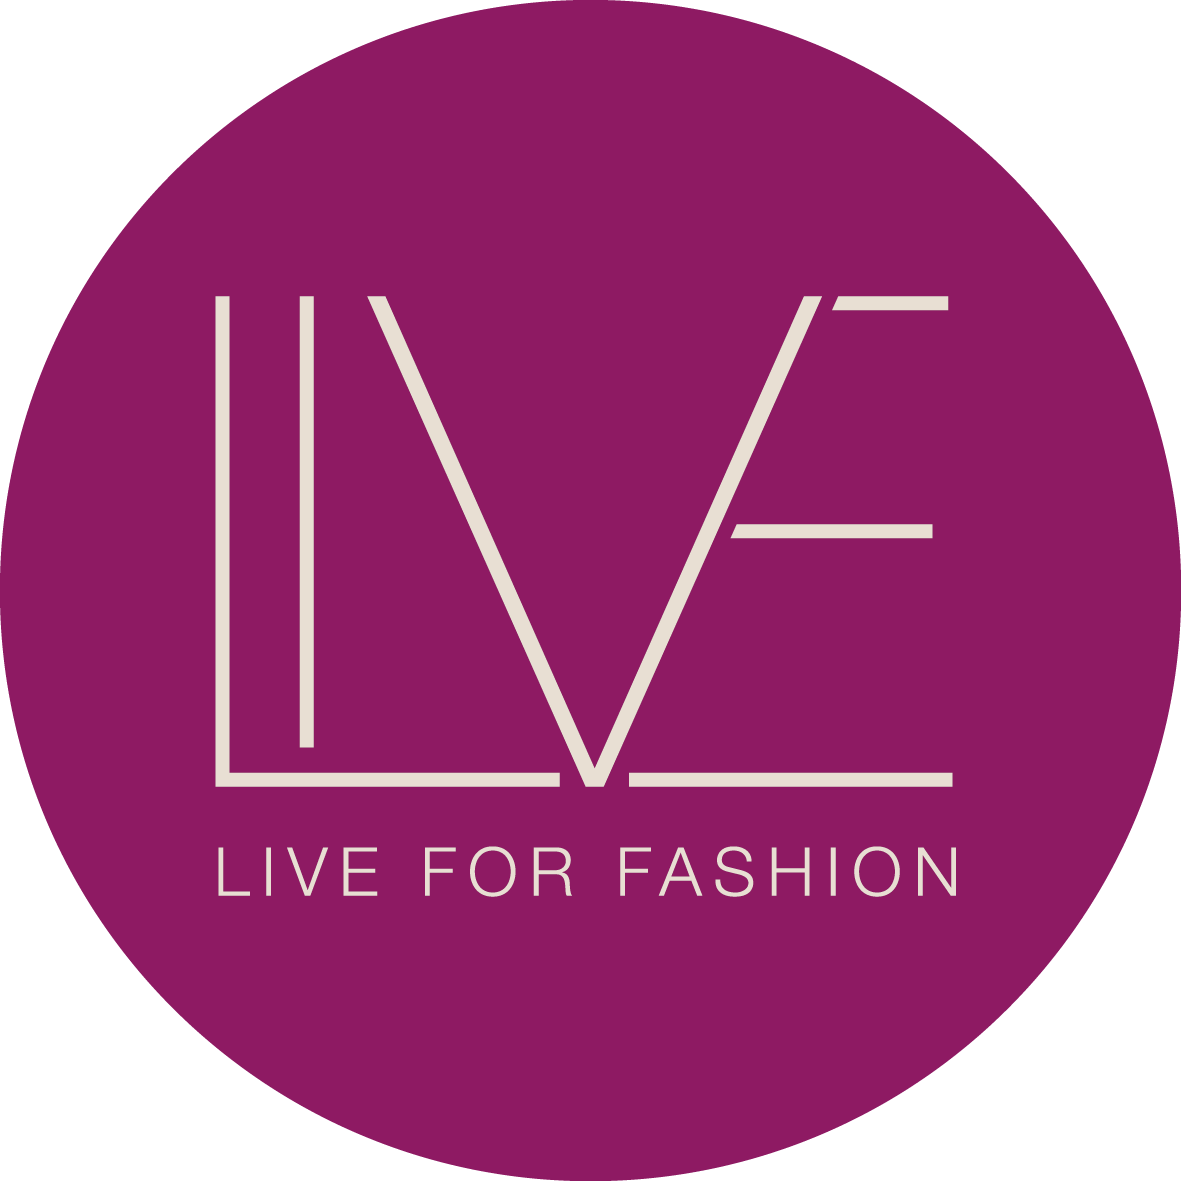 LIVE FOR FASHION